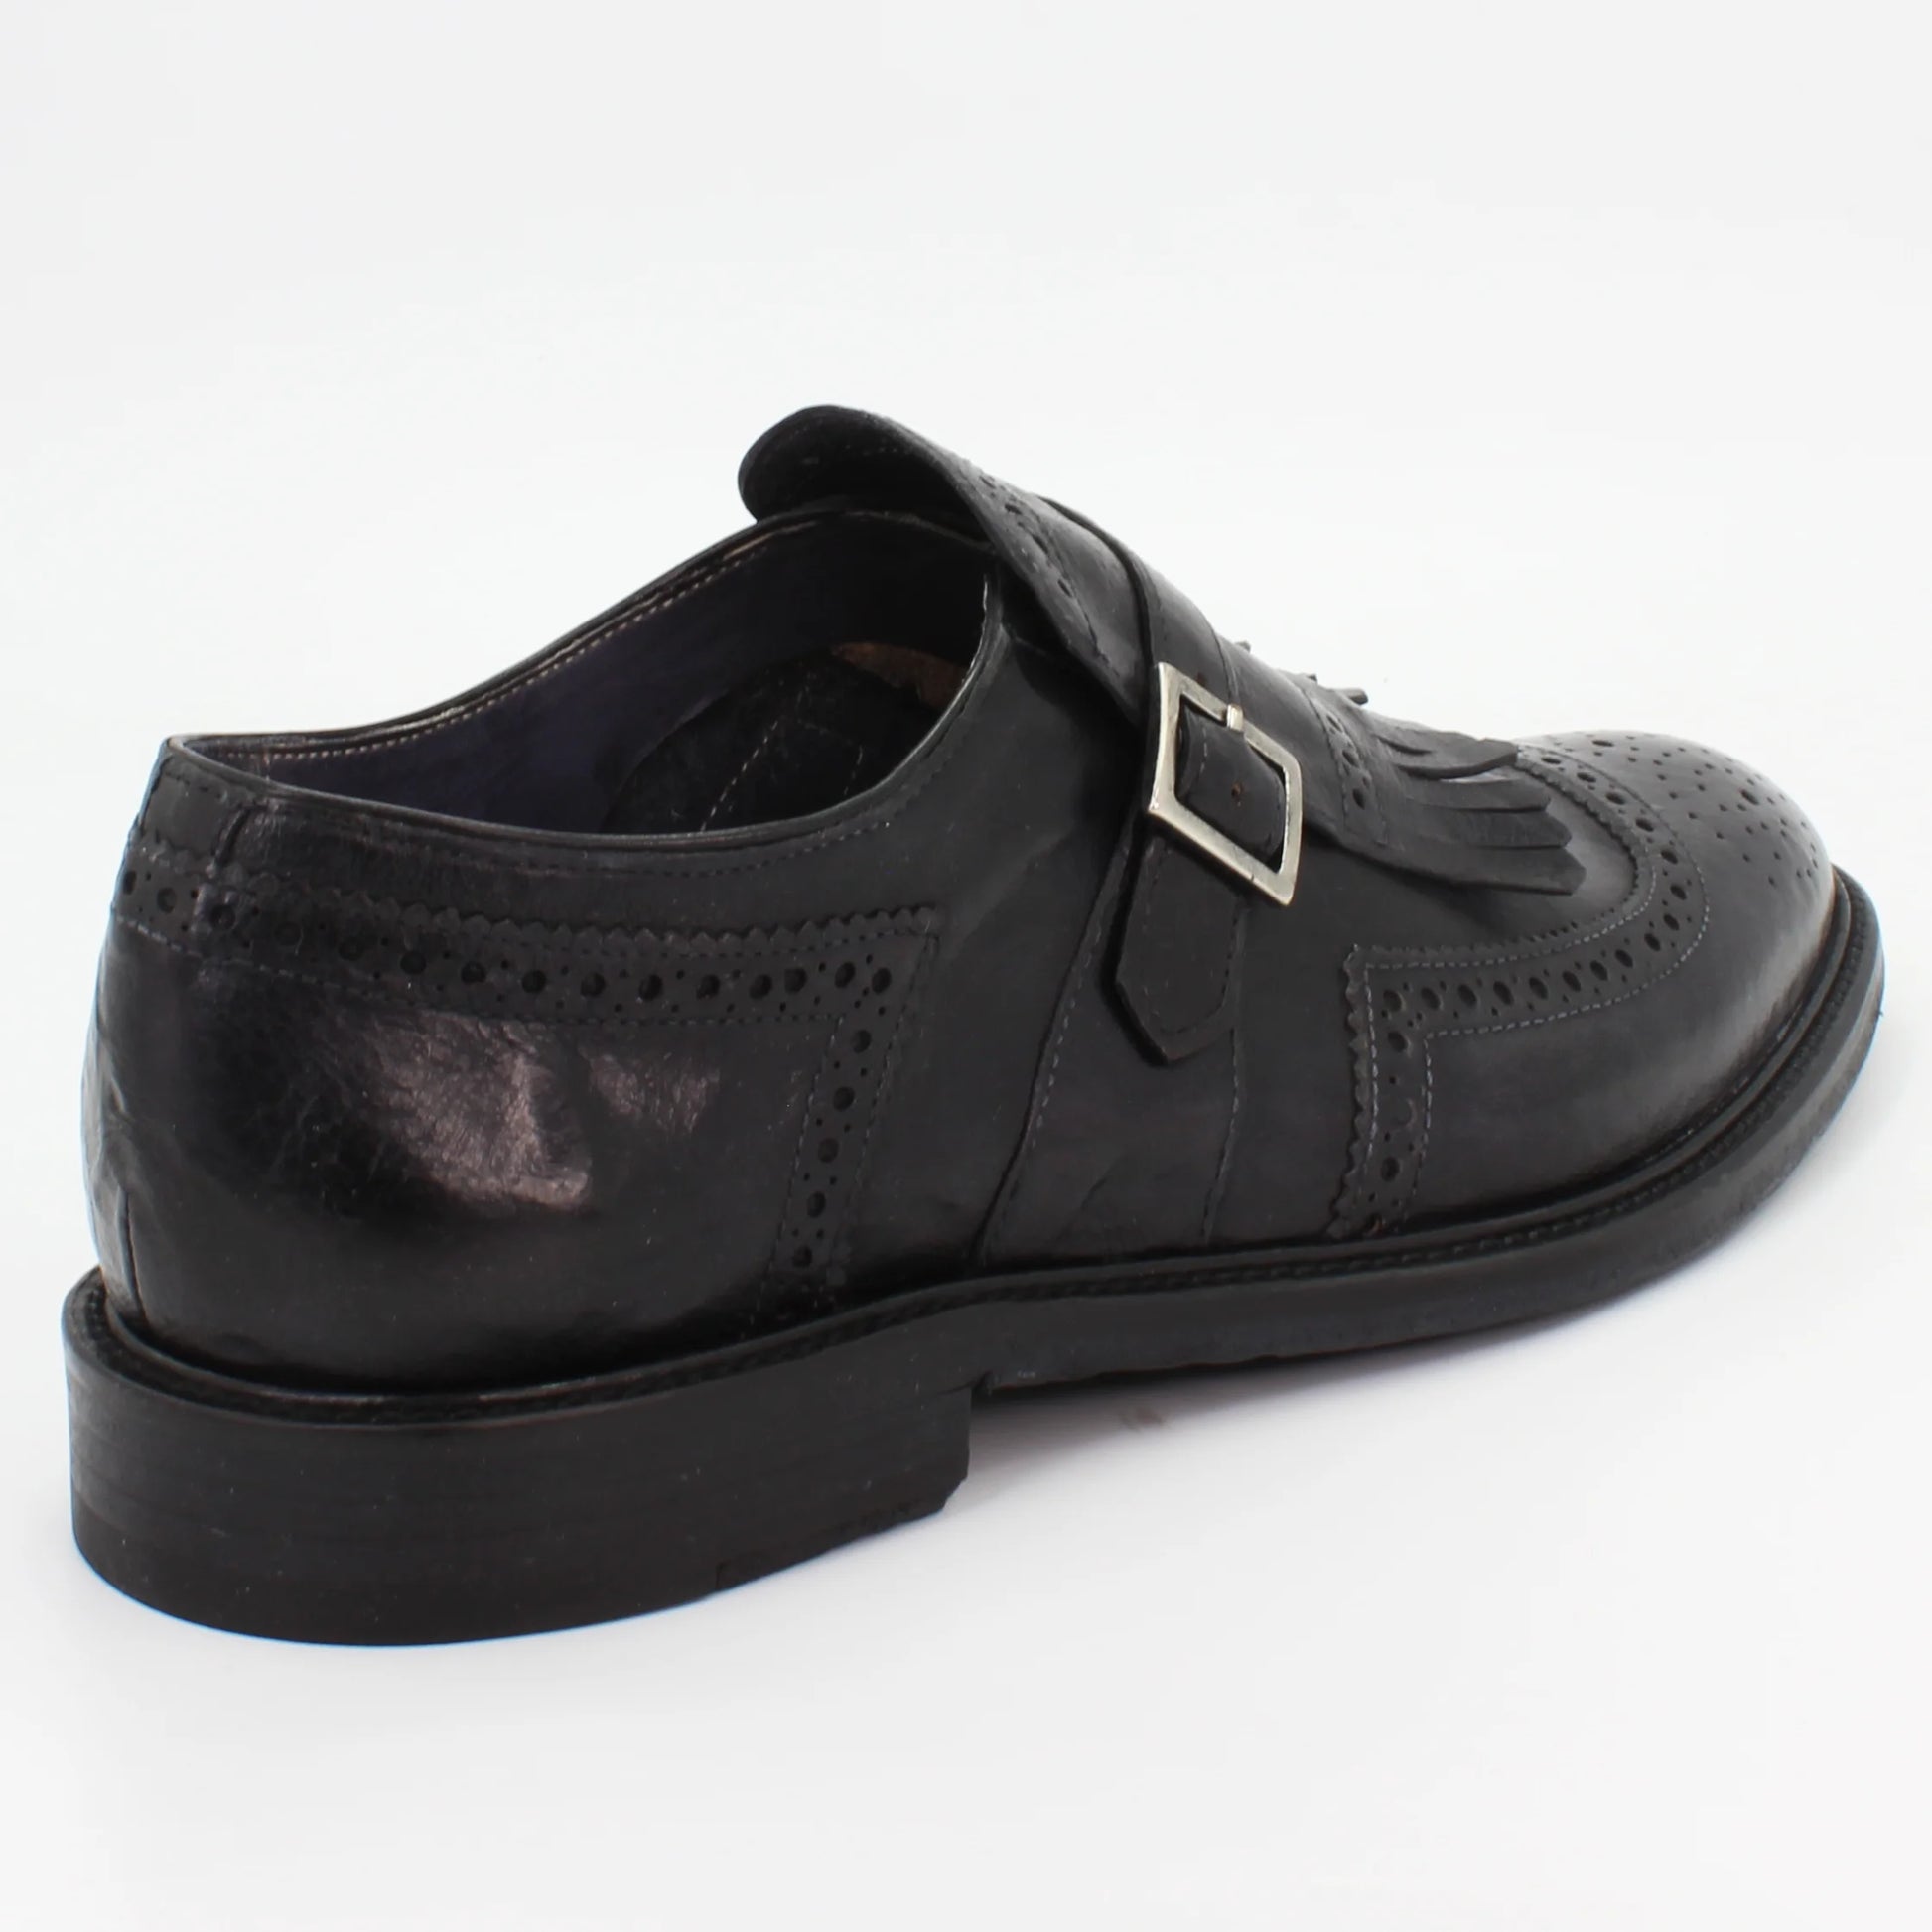 Shop Handmade Italian Leather buckle mocassin in black (BRU11272) or browse our range of hand-made Italian shoes for men in leather or suede in-store at Aliverti Cape Town, or shop online. We deliver in South Africa & offer multiple payment plans as well as accept multiple safe & secure payment methods.